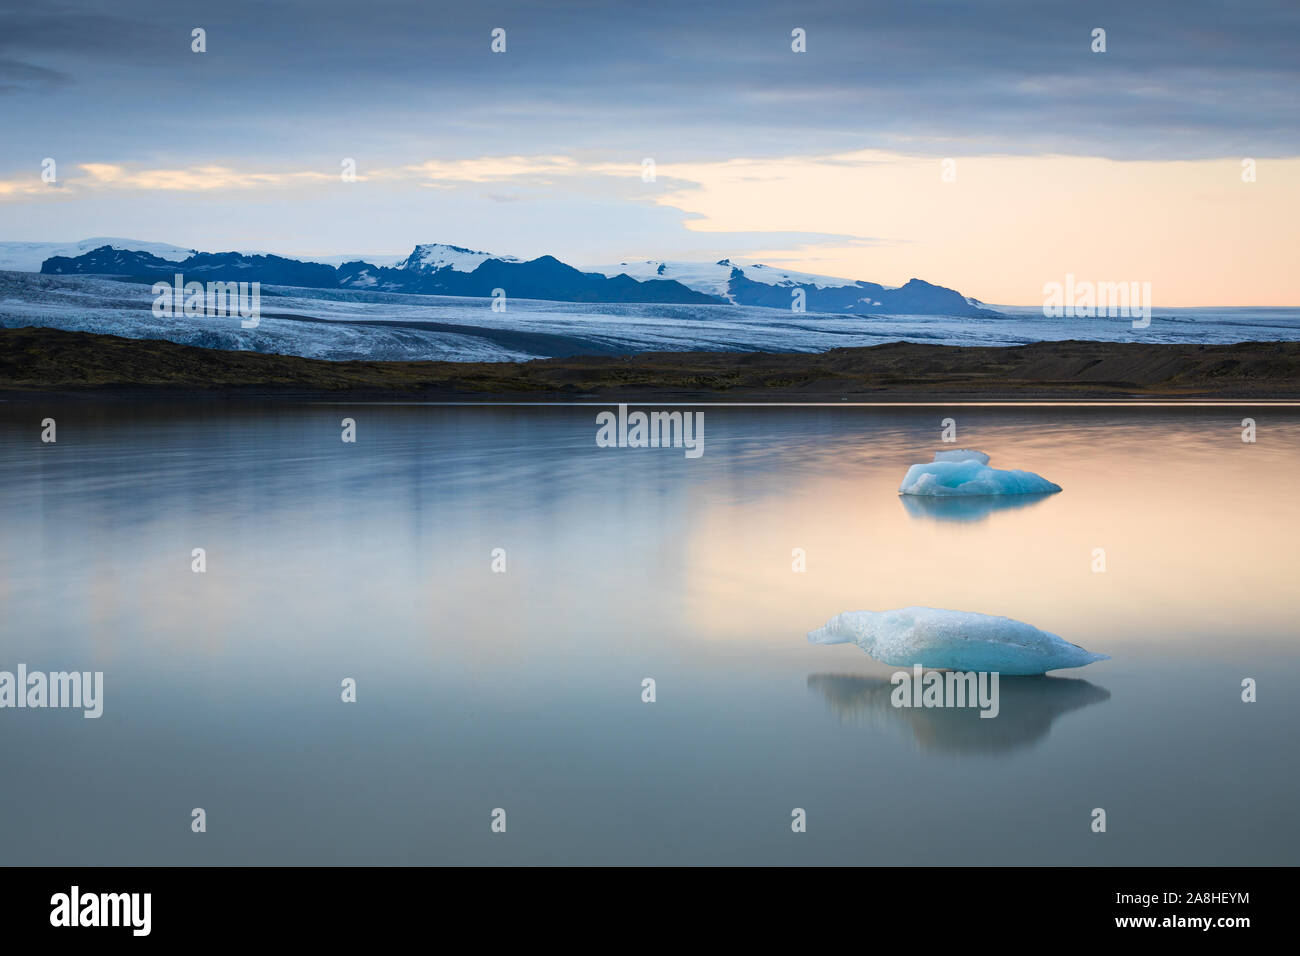 A wonderful and calm scene. Icelands beautiful glacier lagoons... Stock Photo